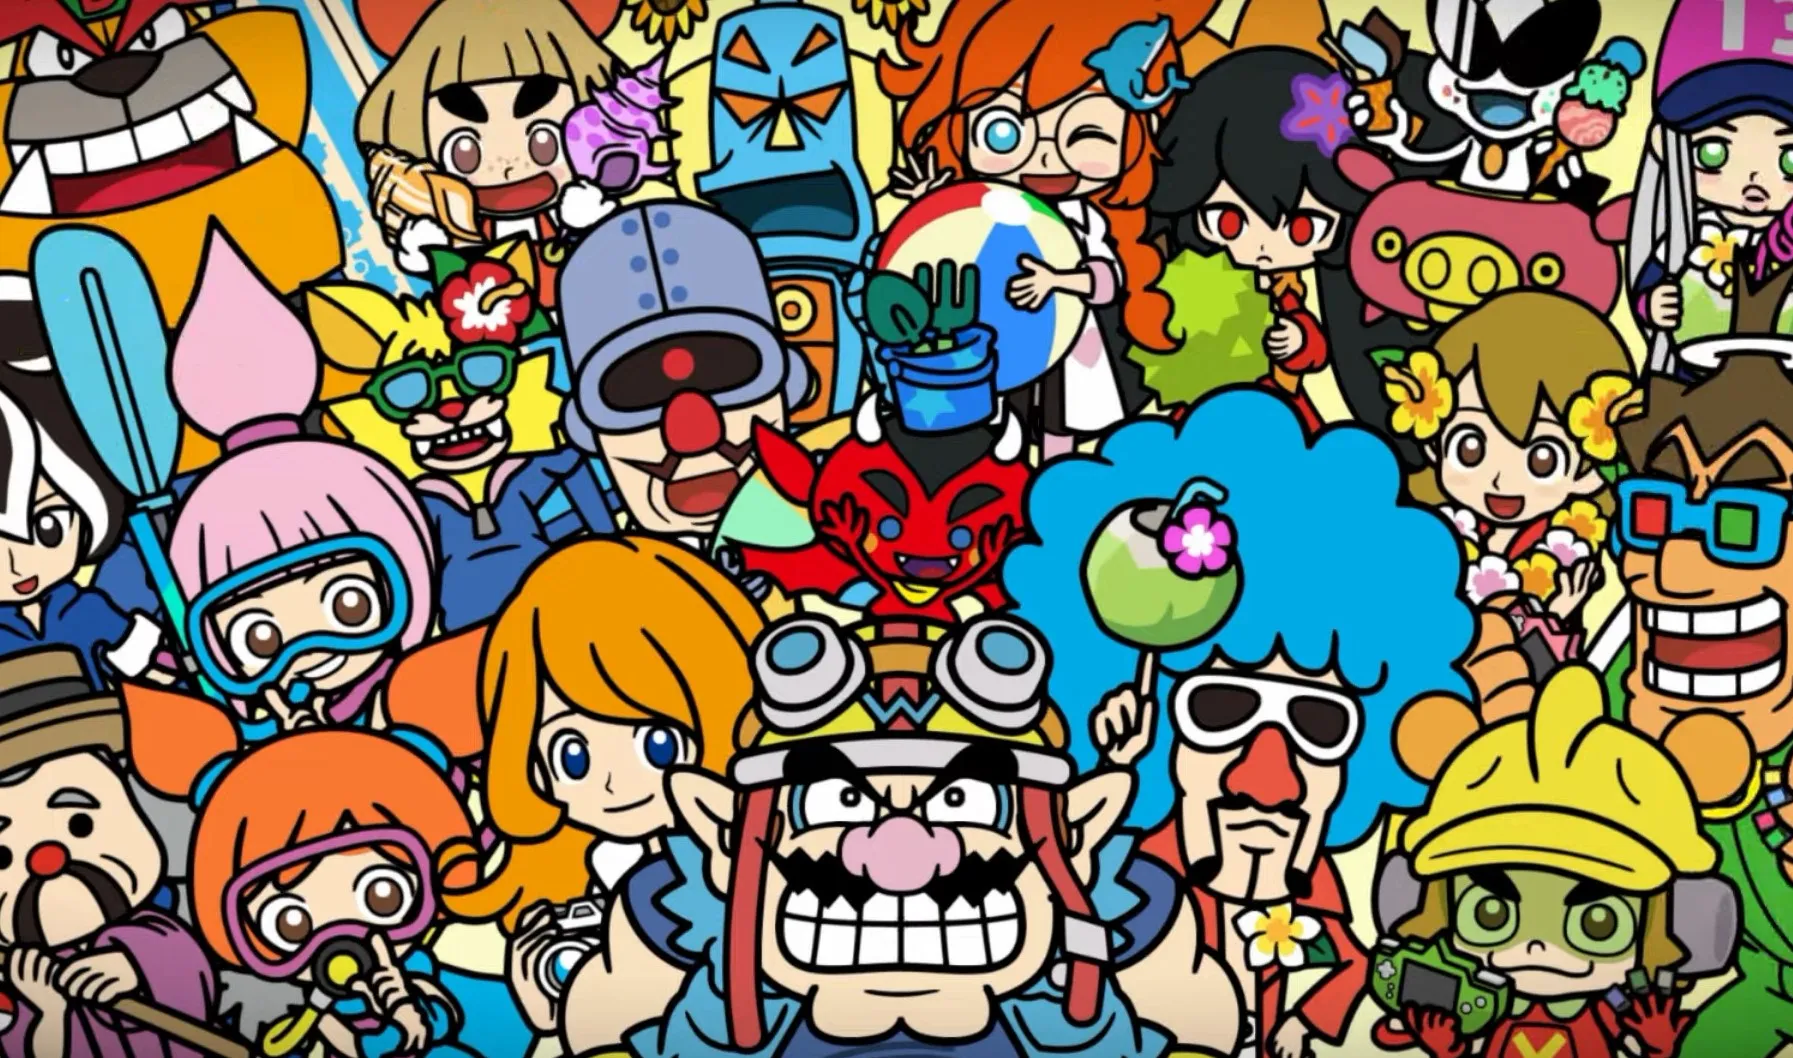 WarioWare Move It Overview Trailer Delivers 3 Minutes of Microgame Madness